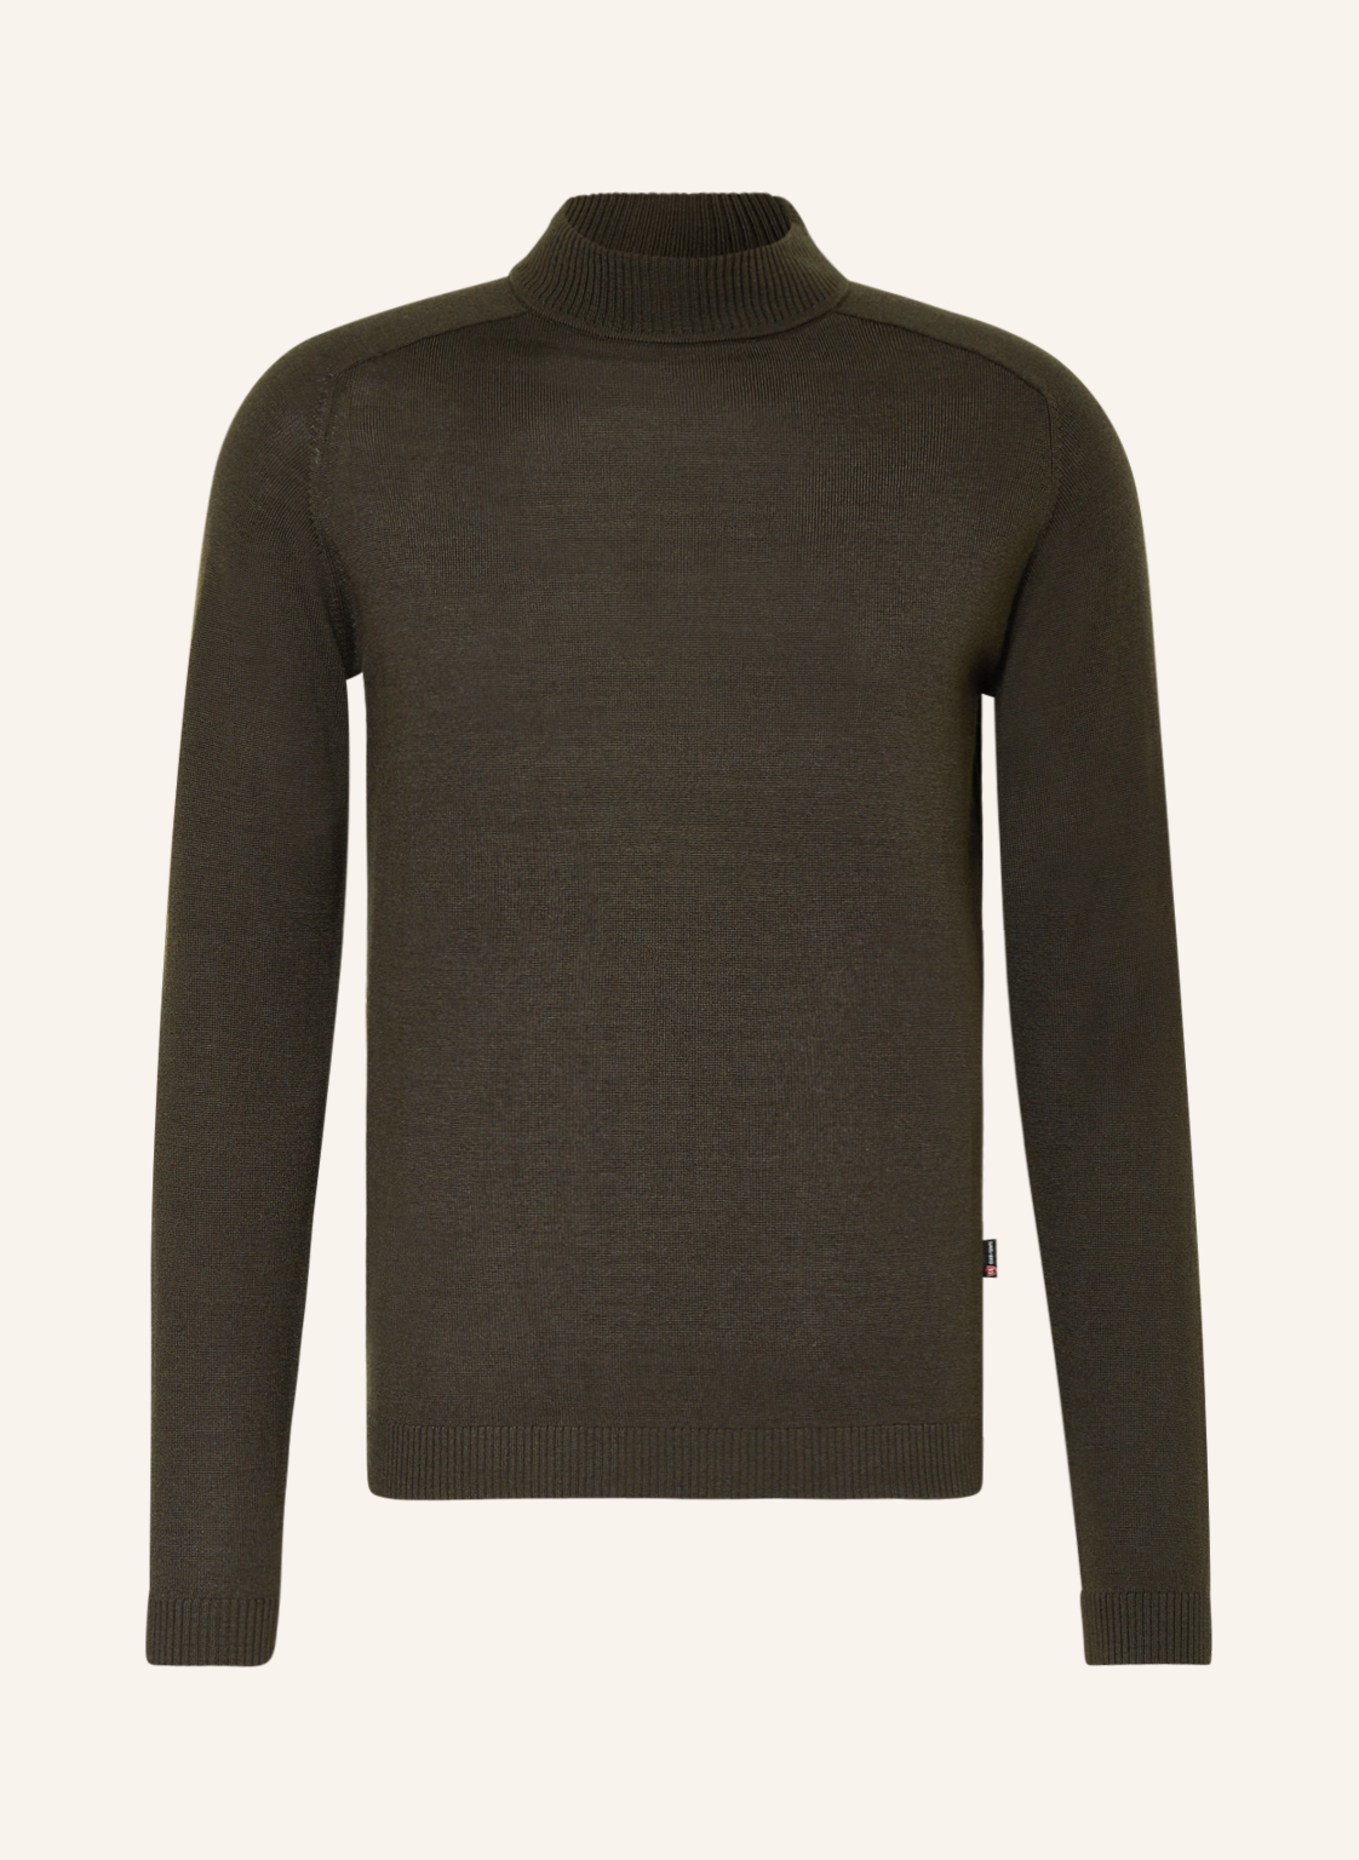 CG - CLUB of GENTS Sweater, Color: DARK GREEN (Image 1)